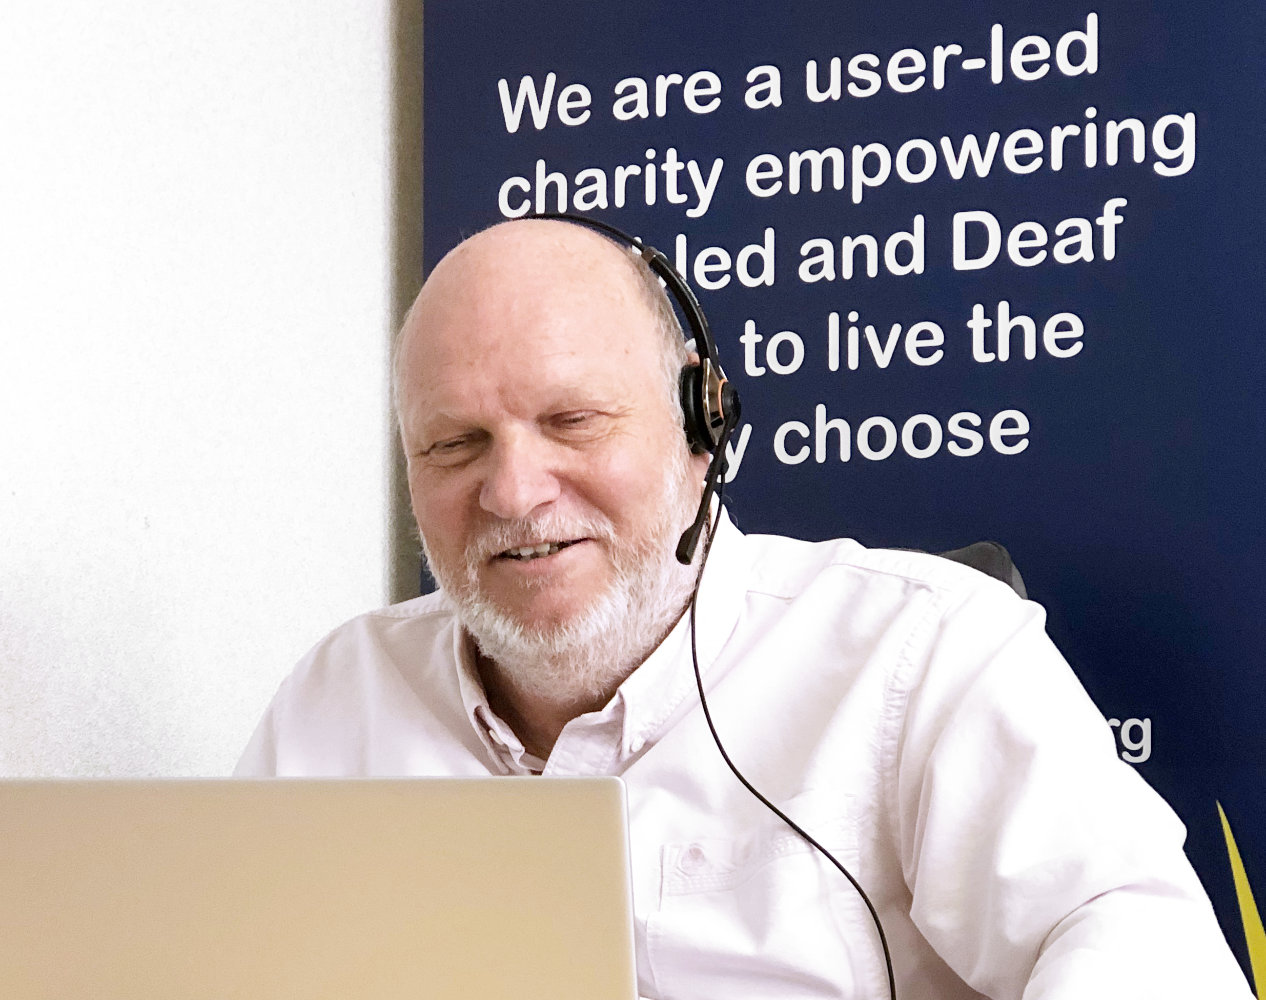 Home from Hospital call handler with headset and laptop sitting in front of a banner saying We are a user-led charity empowering disabled and Deaf people to live the life they choose